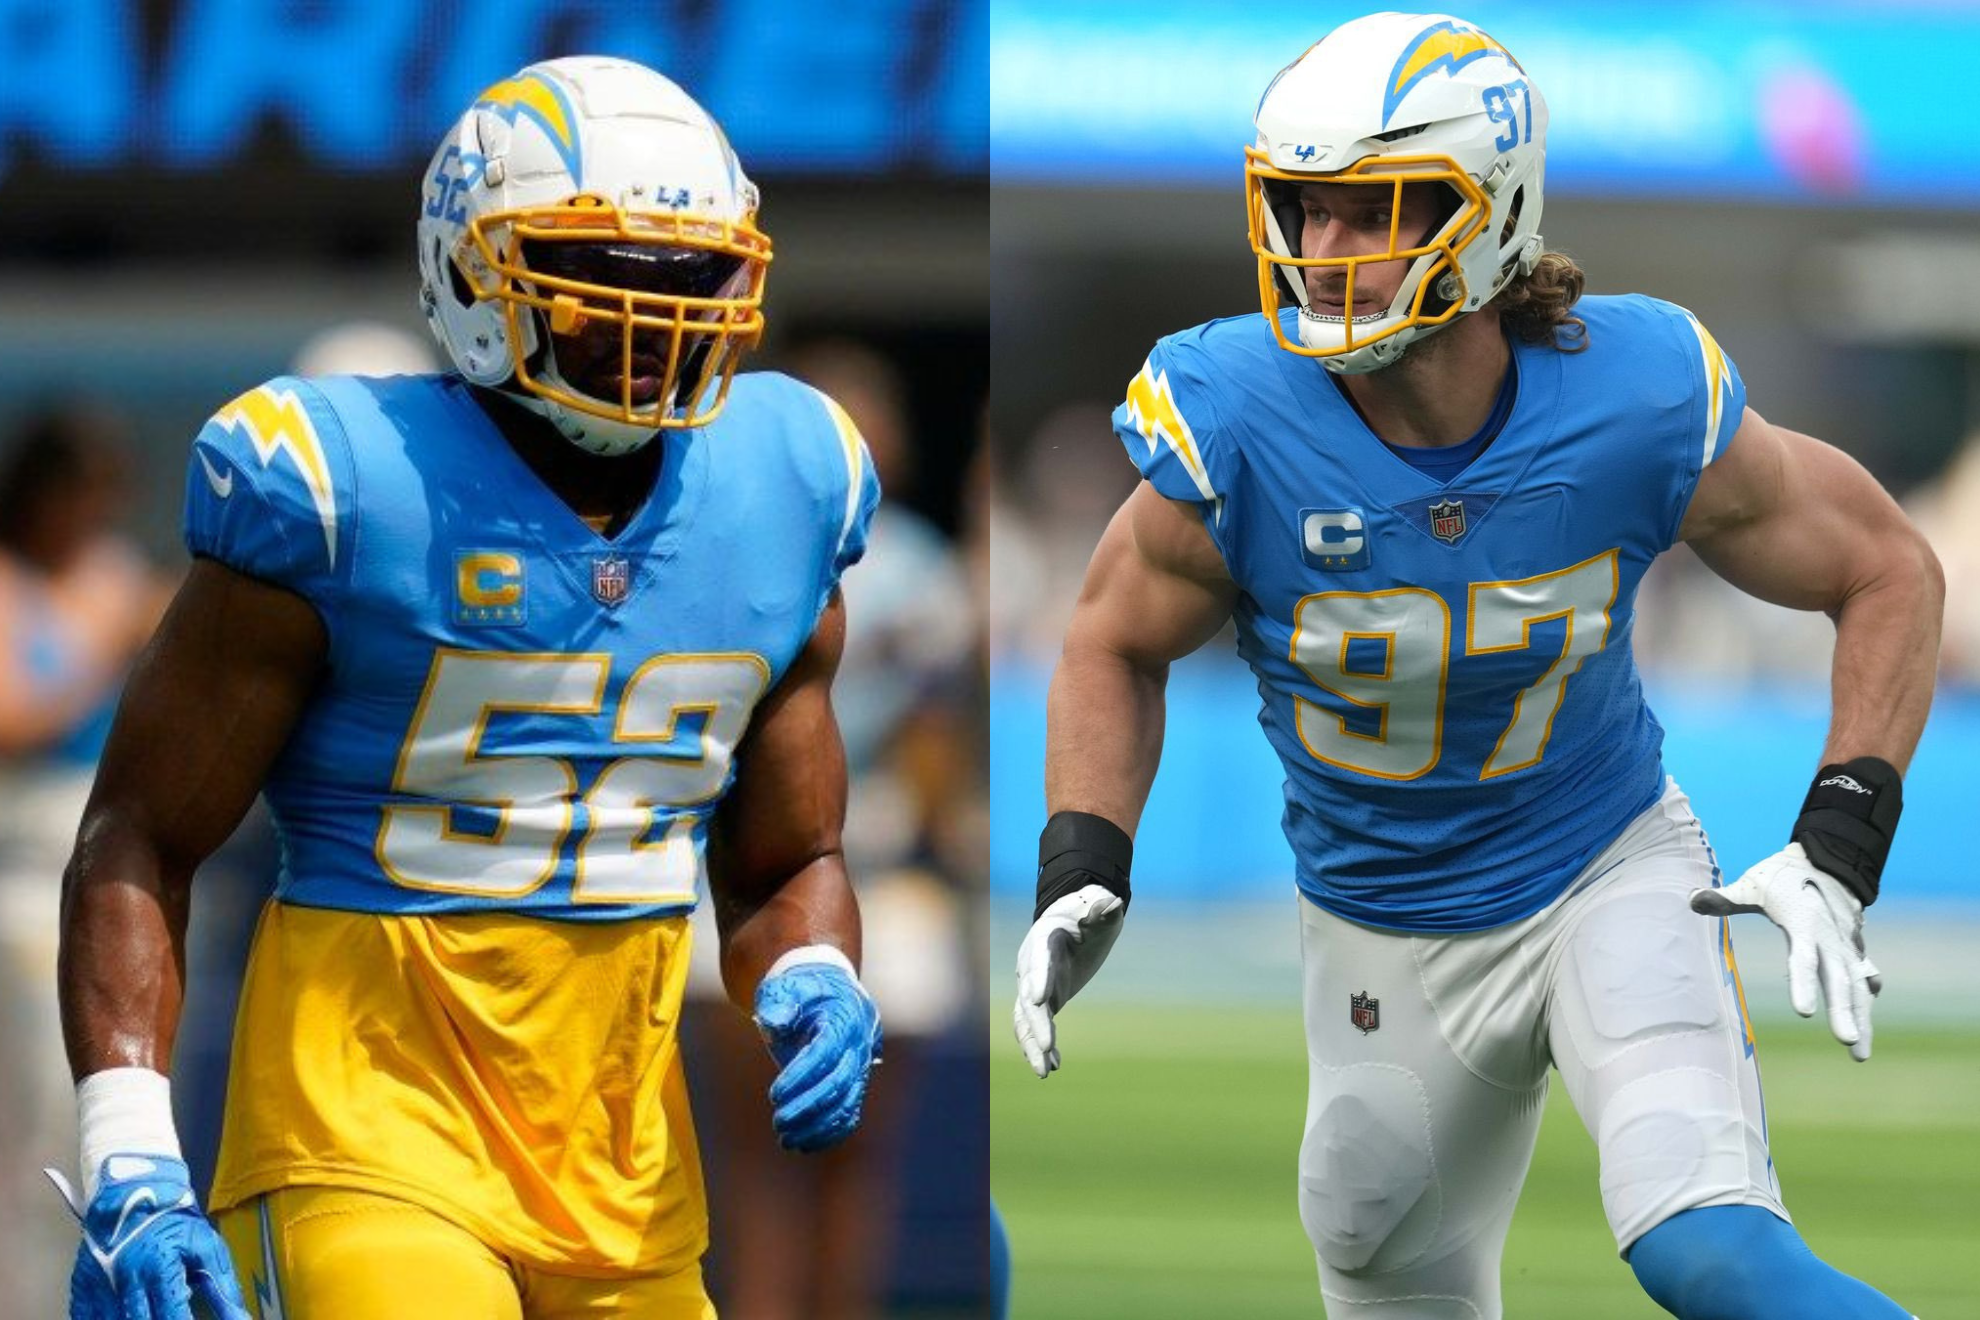 Mack (left) and Bosa (right) are signed to expensive contracts that the Chargers would like to send elsewhere.